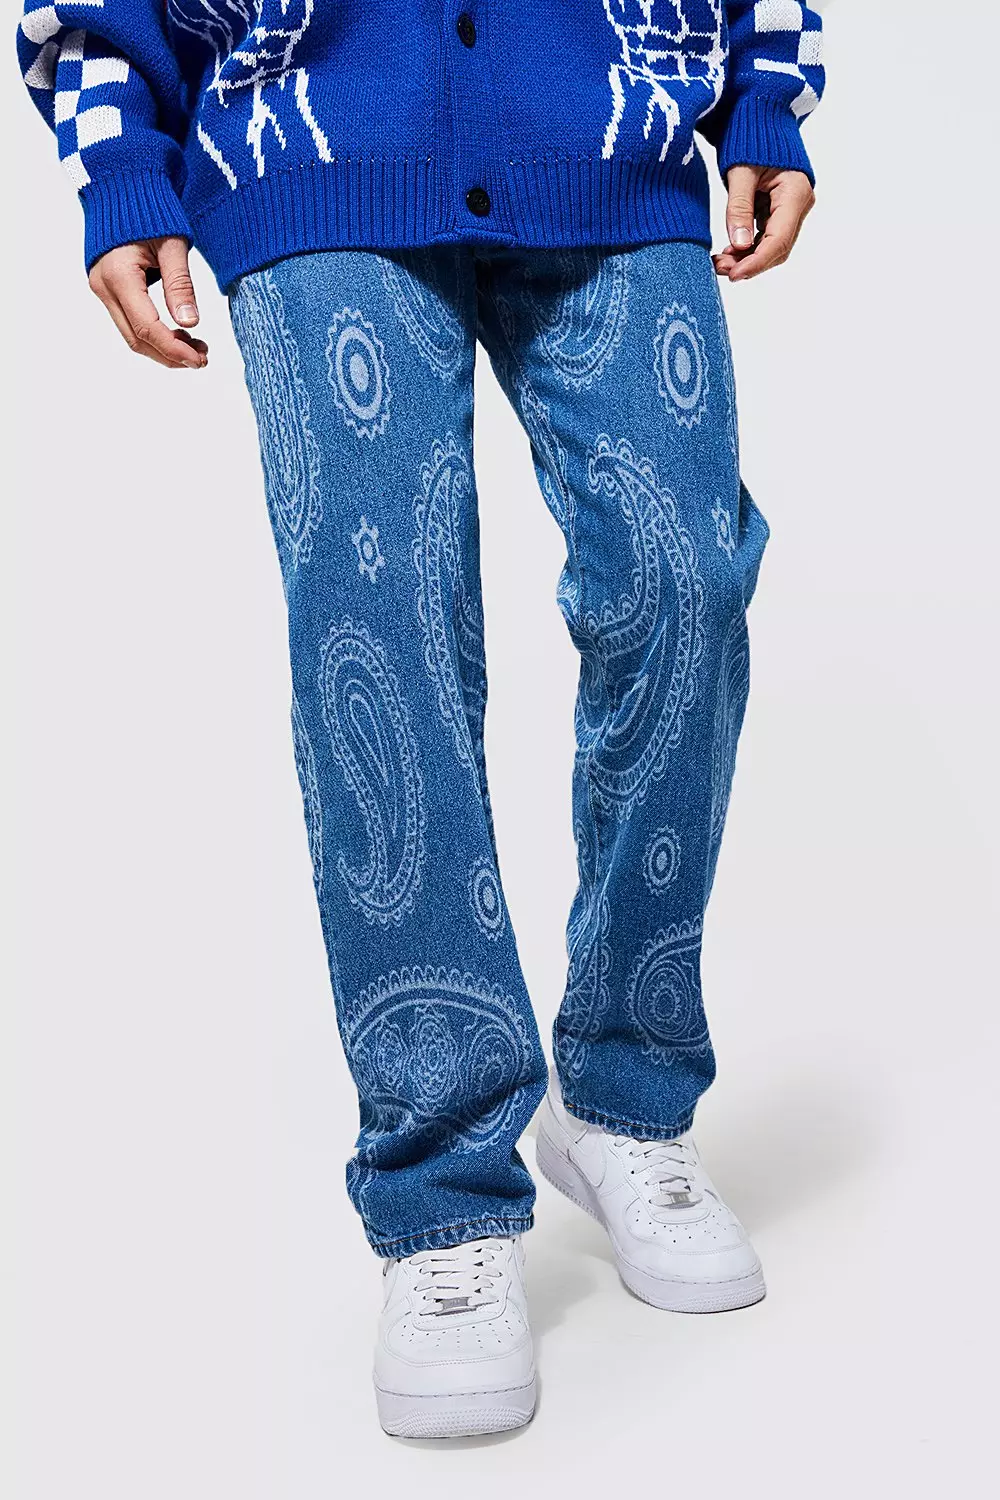 Relaxed Fit Paisley Print | boohooMAN Jeans USA